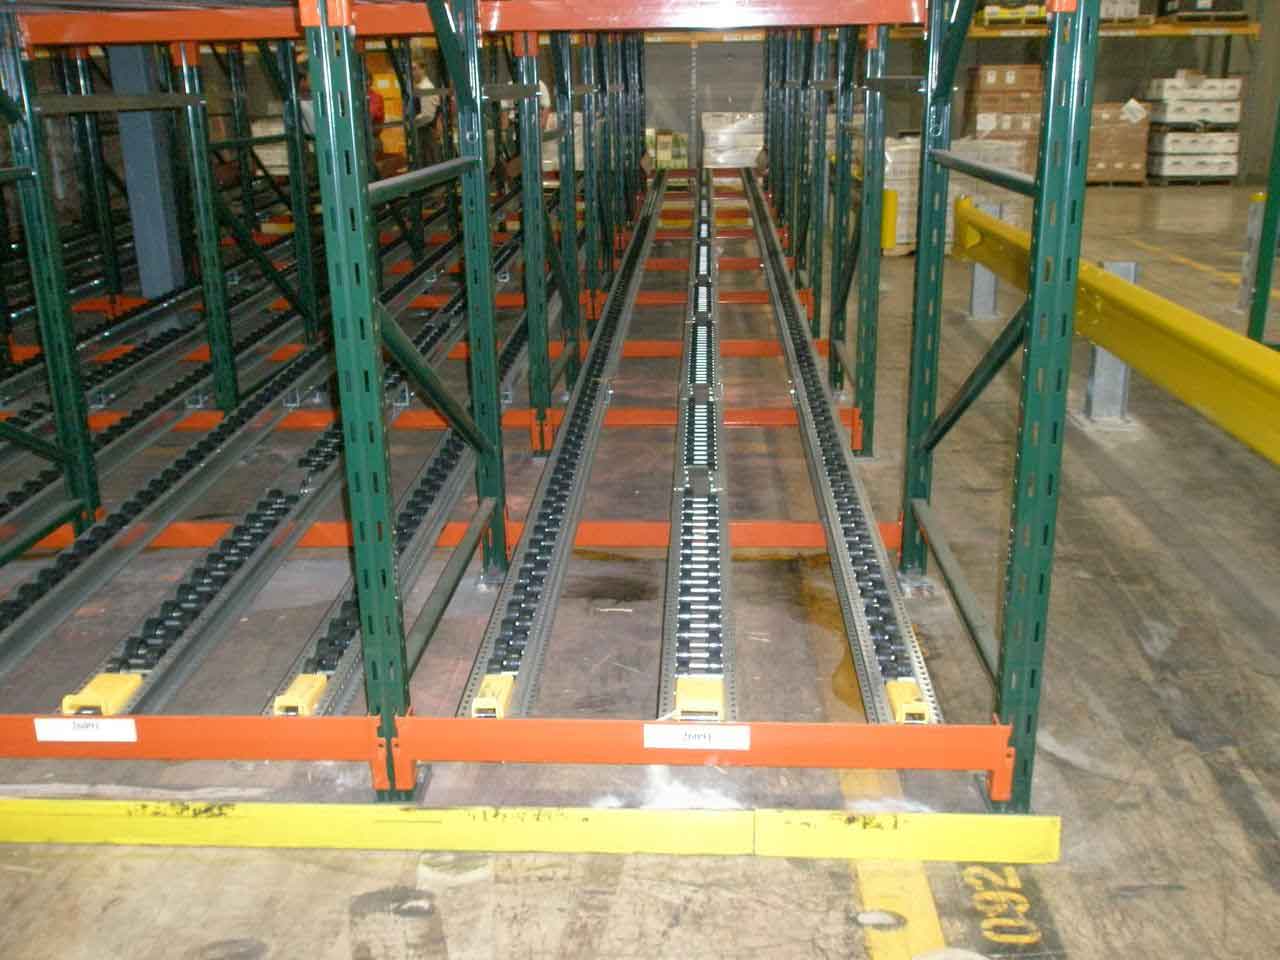 Empty pallet flow shelves sit next to one another